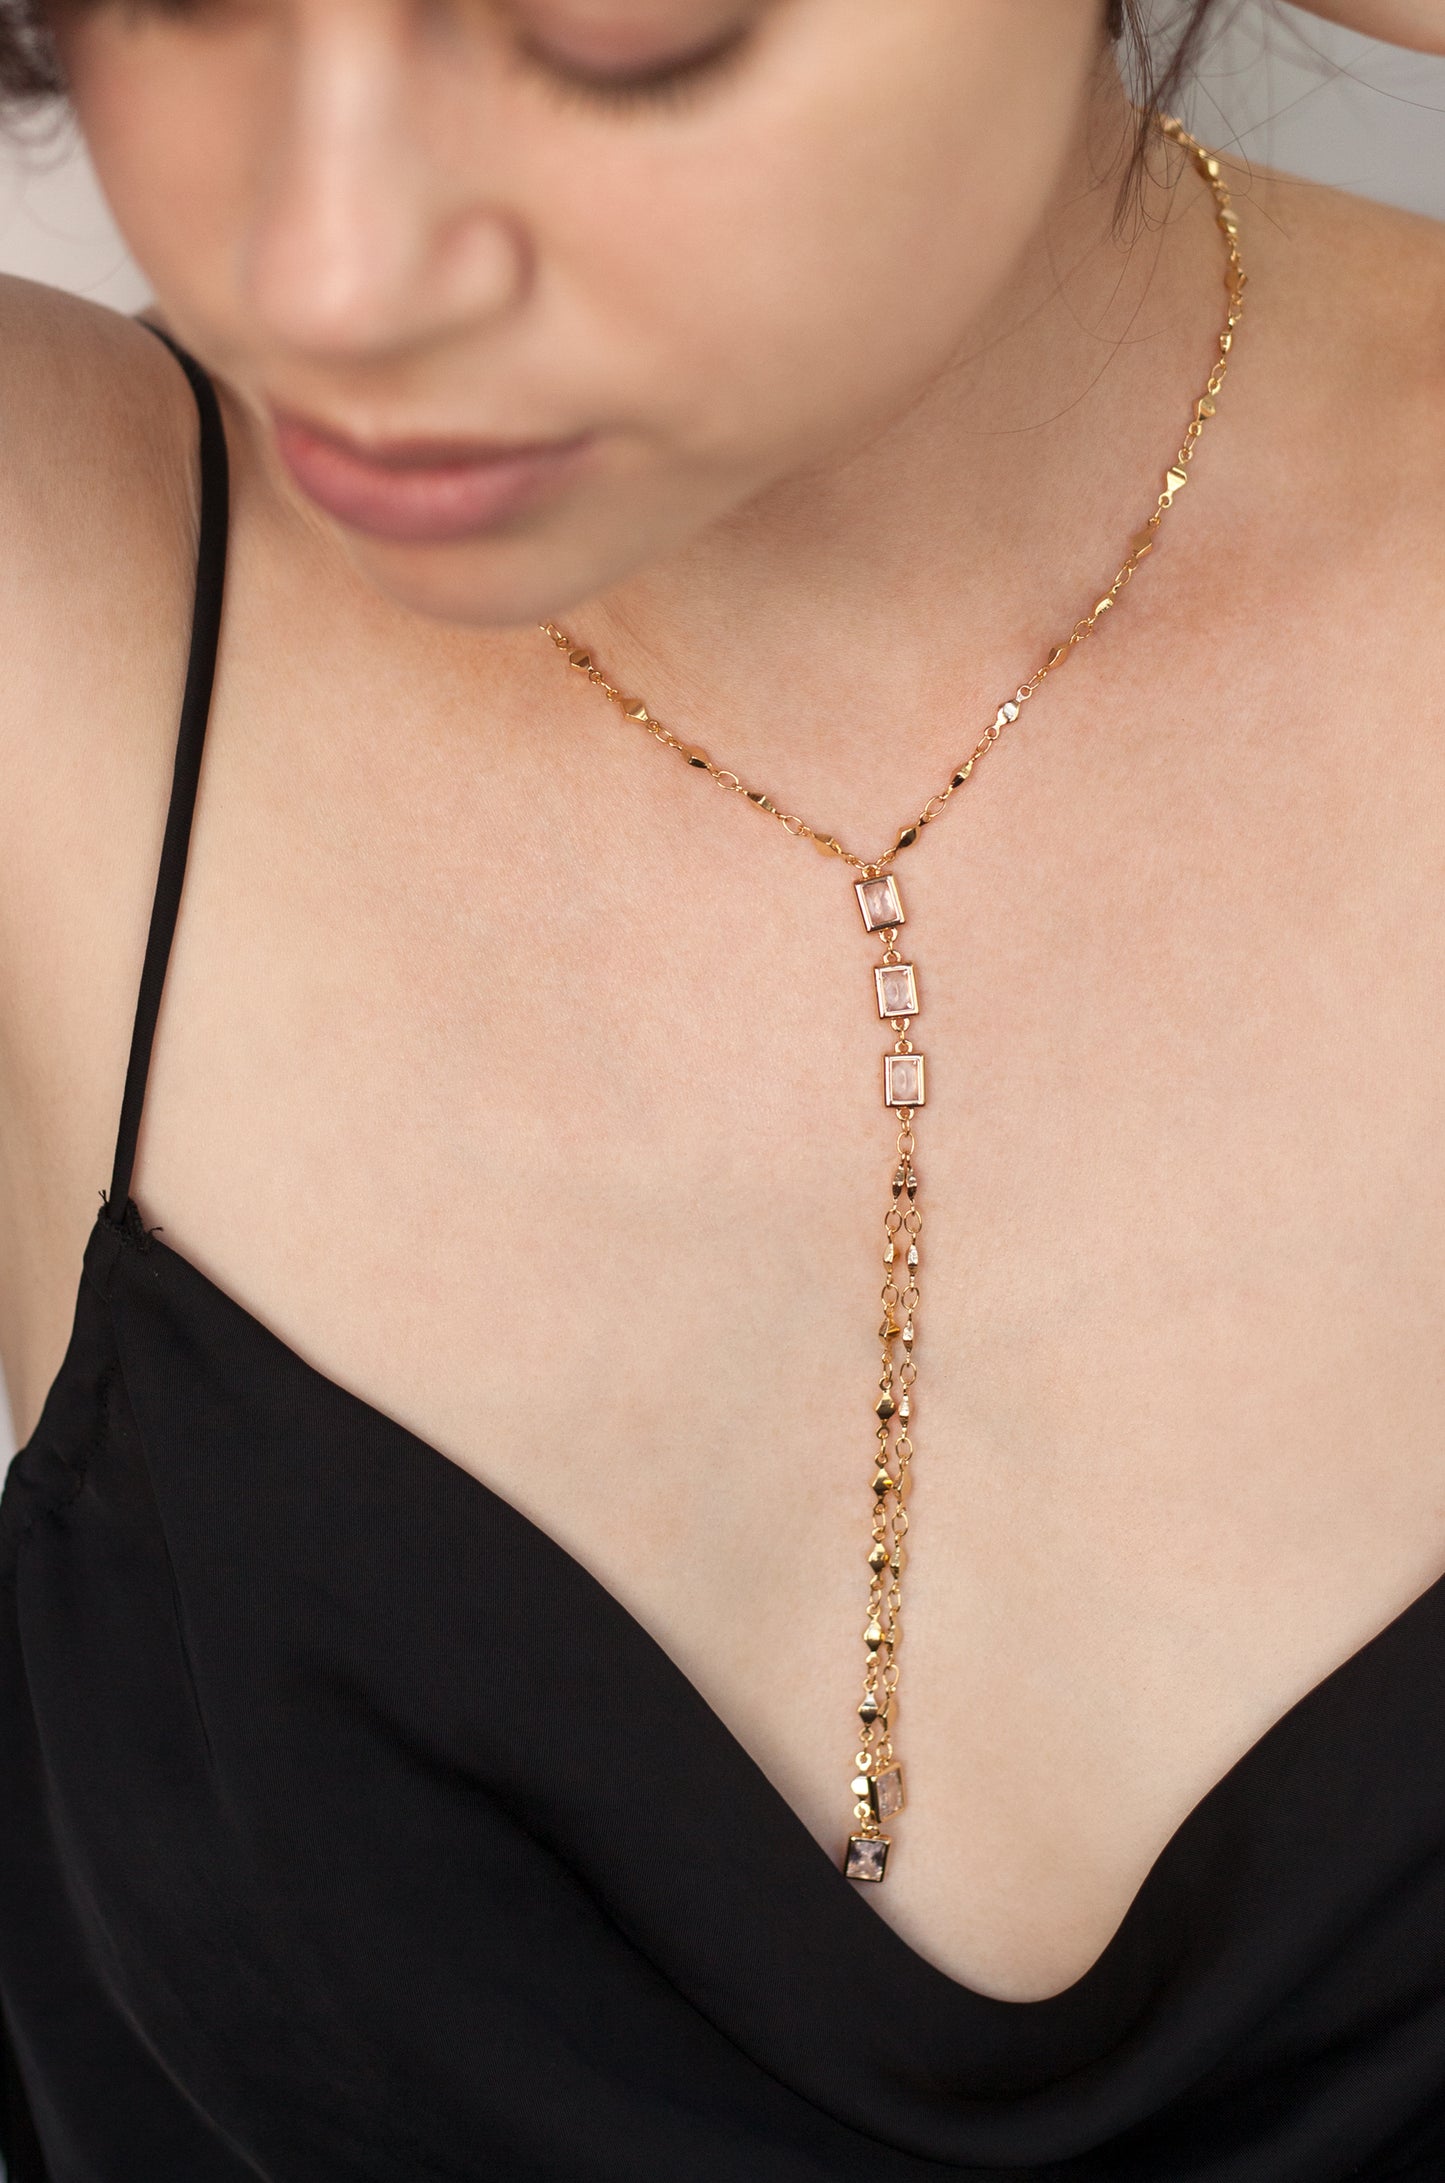 Behind the Glam 18k Gold Plated Necklace shown on a model  